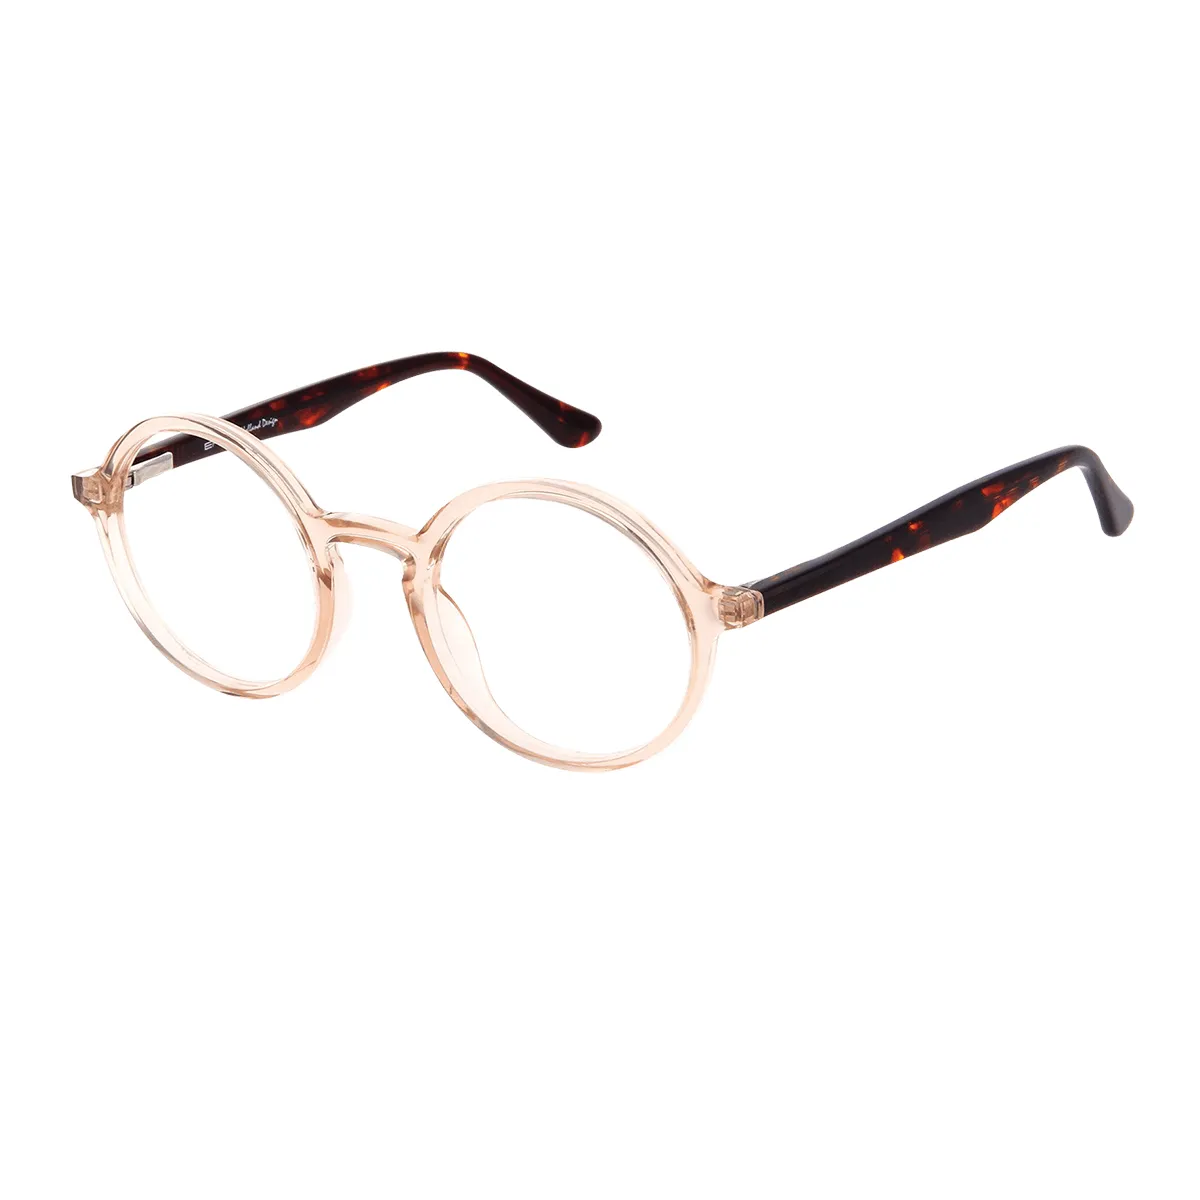 Deanna - Round Pink Glasses for Women